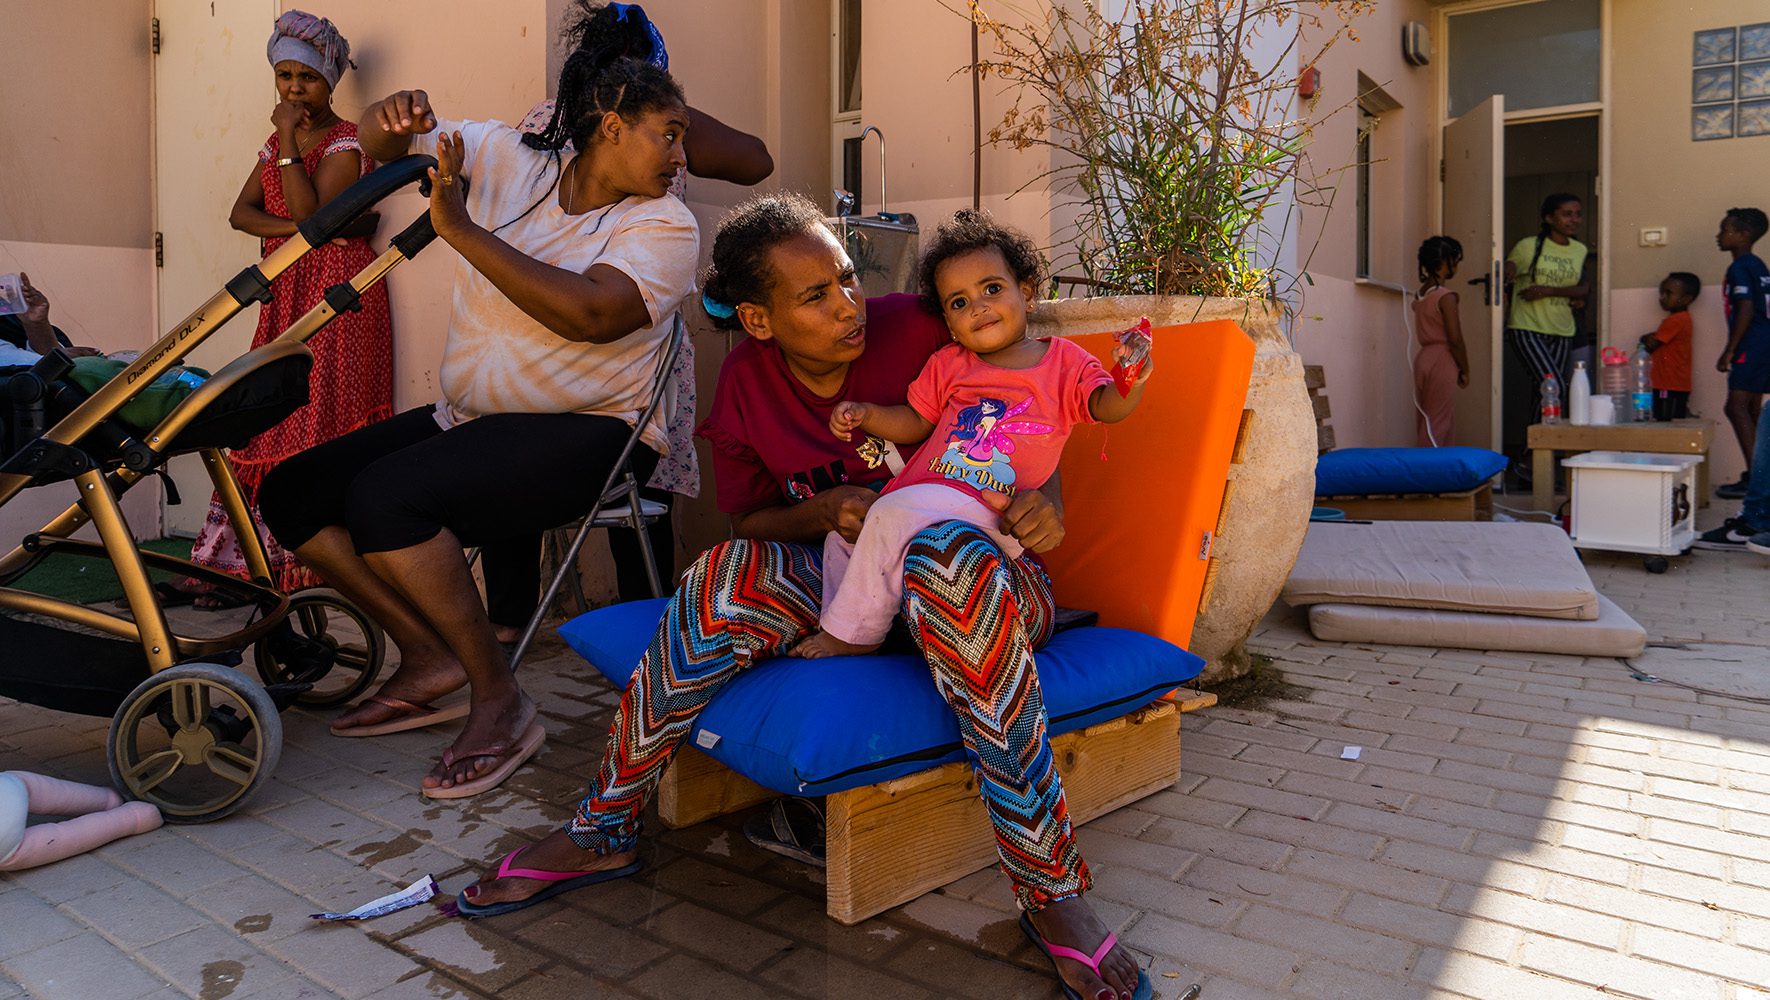 An Eritrean mother and her young daughter await assistance, provided by HIAS to a displaced Eritrean community in Nitsana Israel. (Sammy Voit for HIAS)